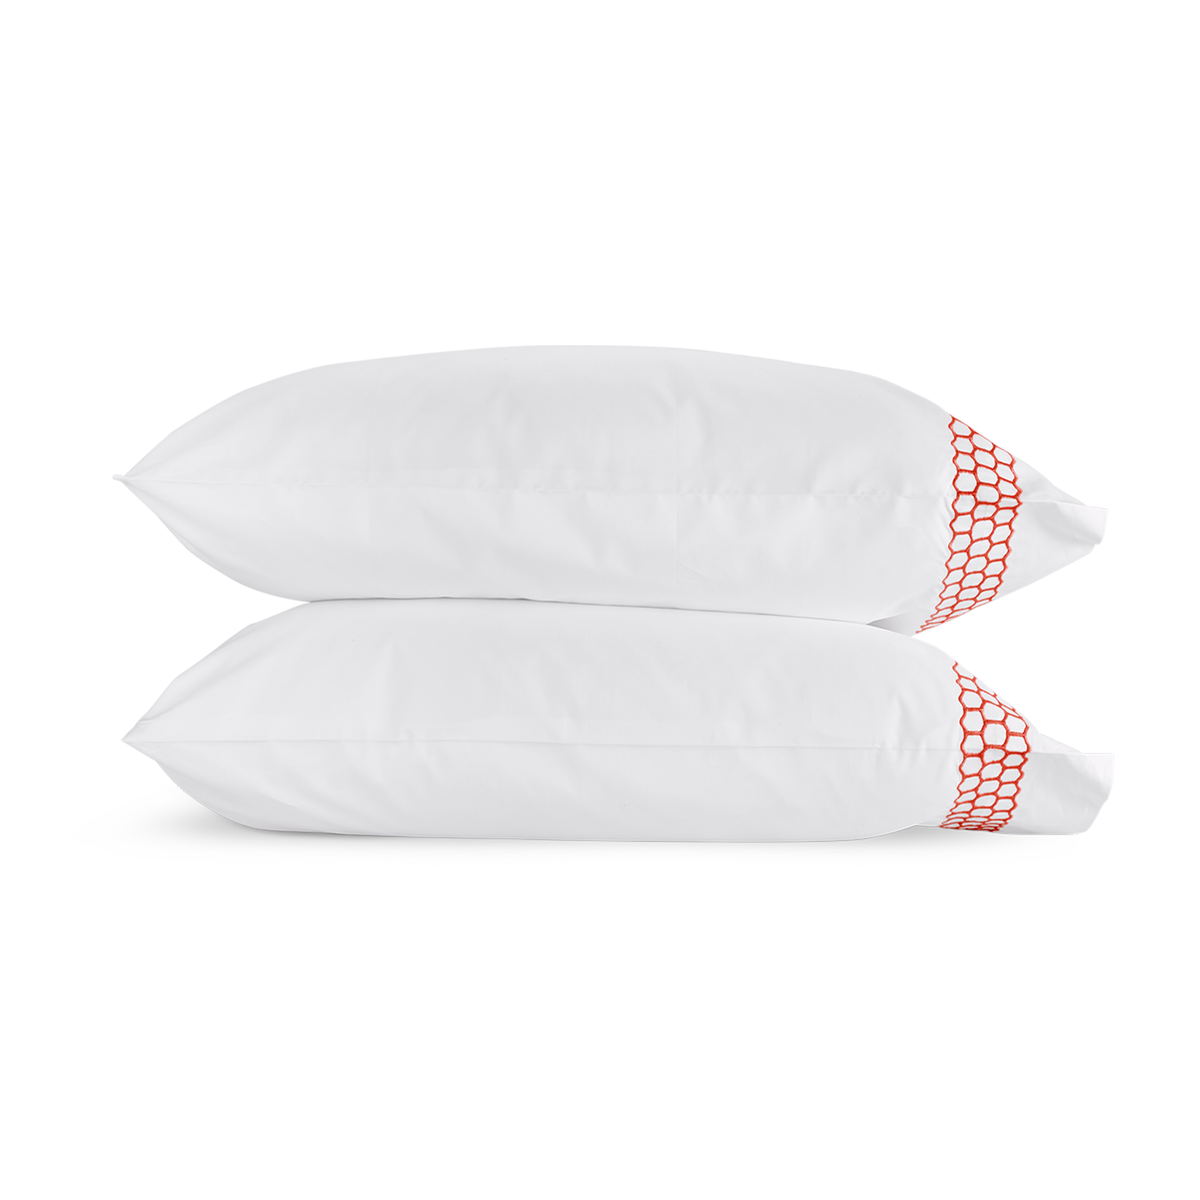 Clear Image of Matouk Liana Bedding Pillowcases in Coral Color